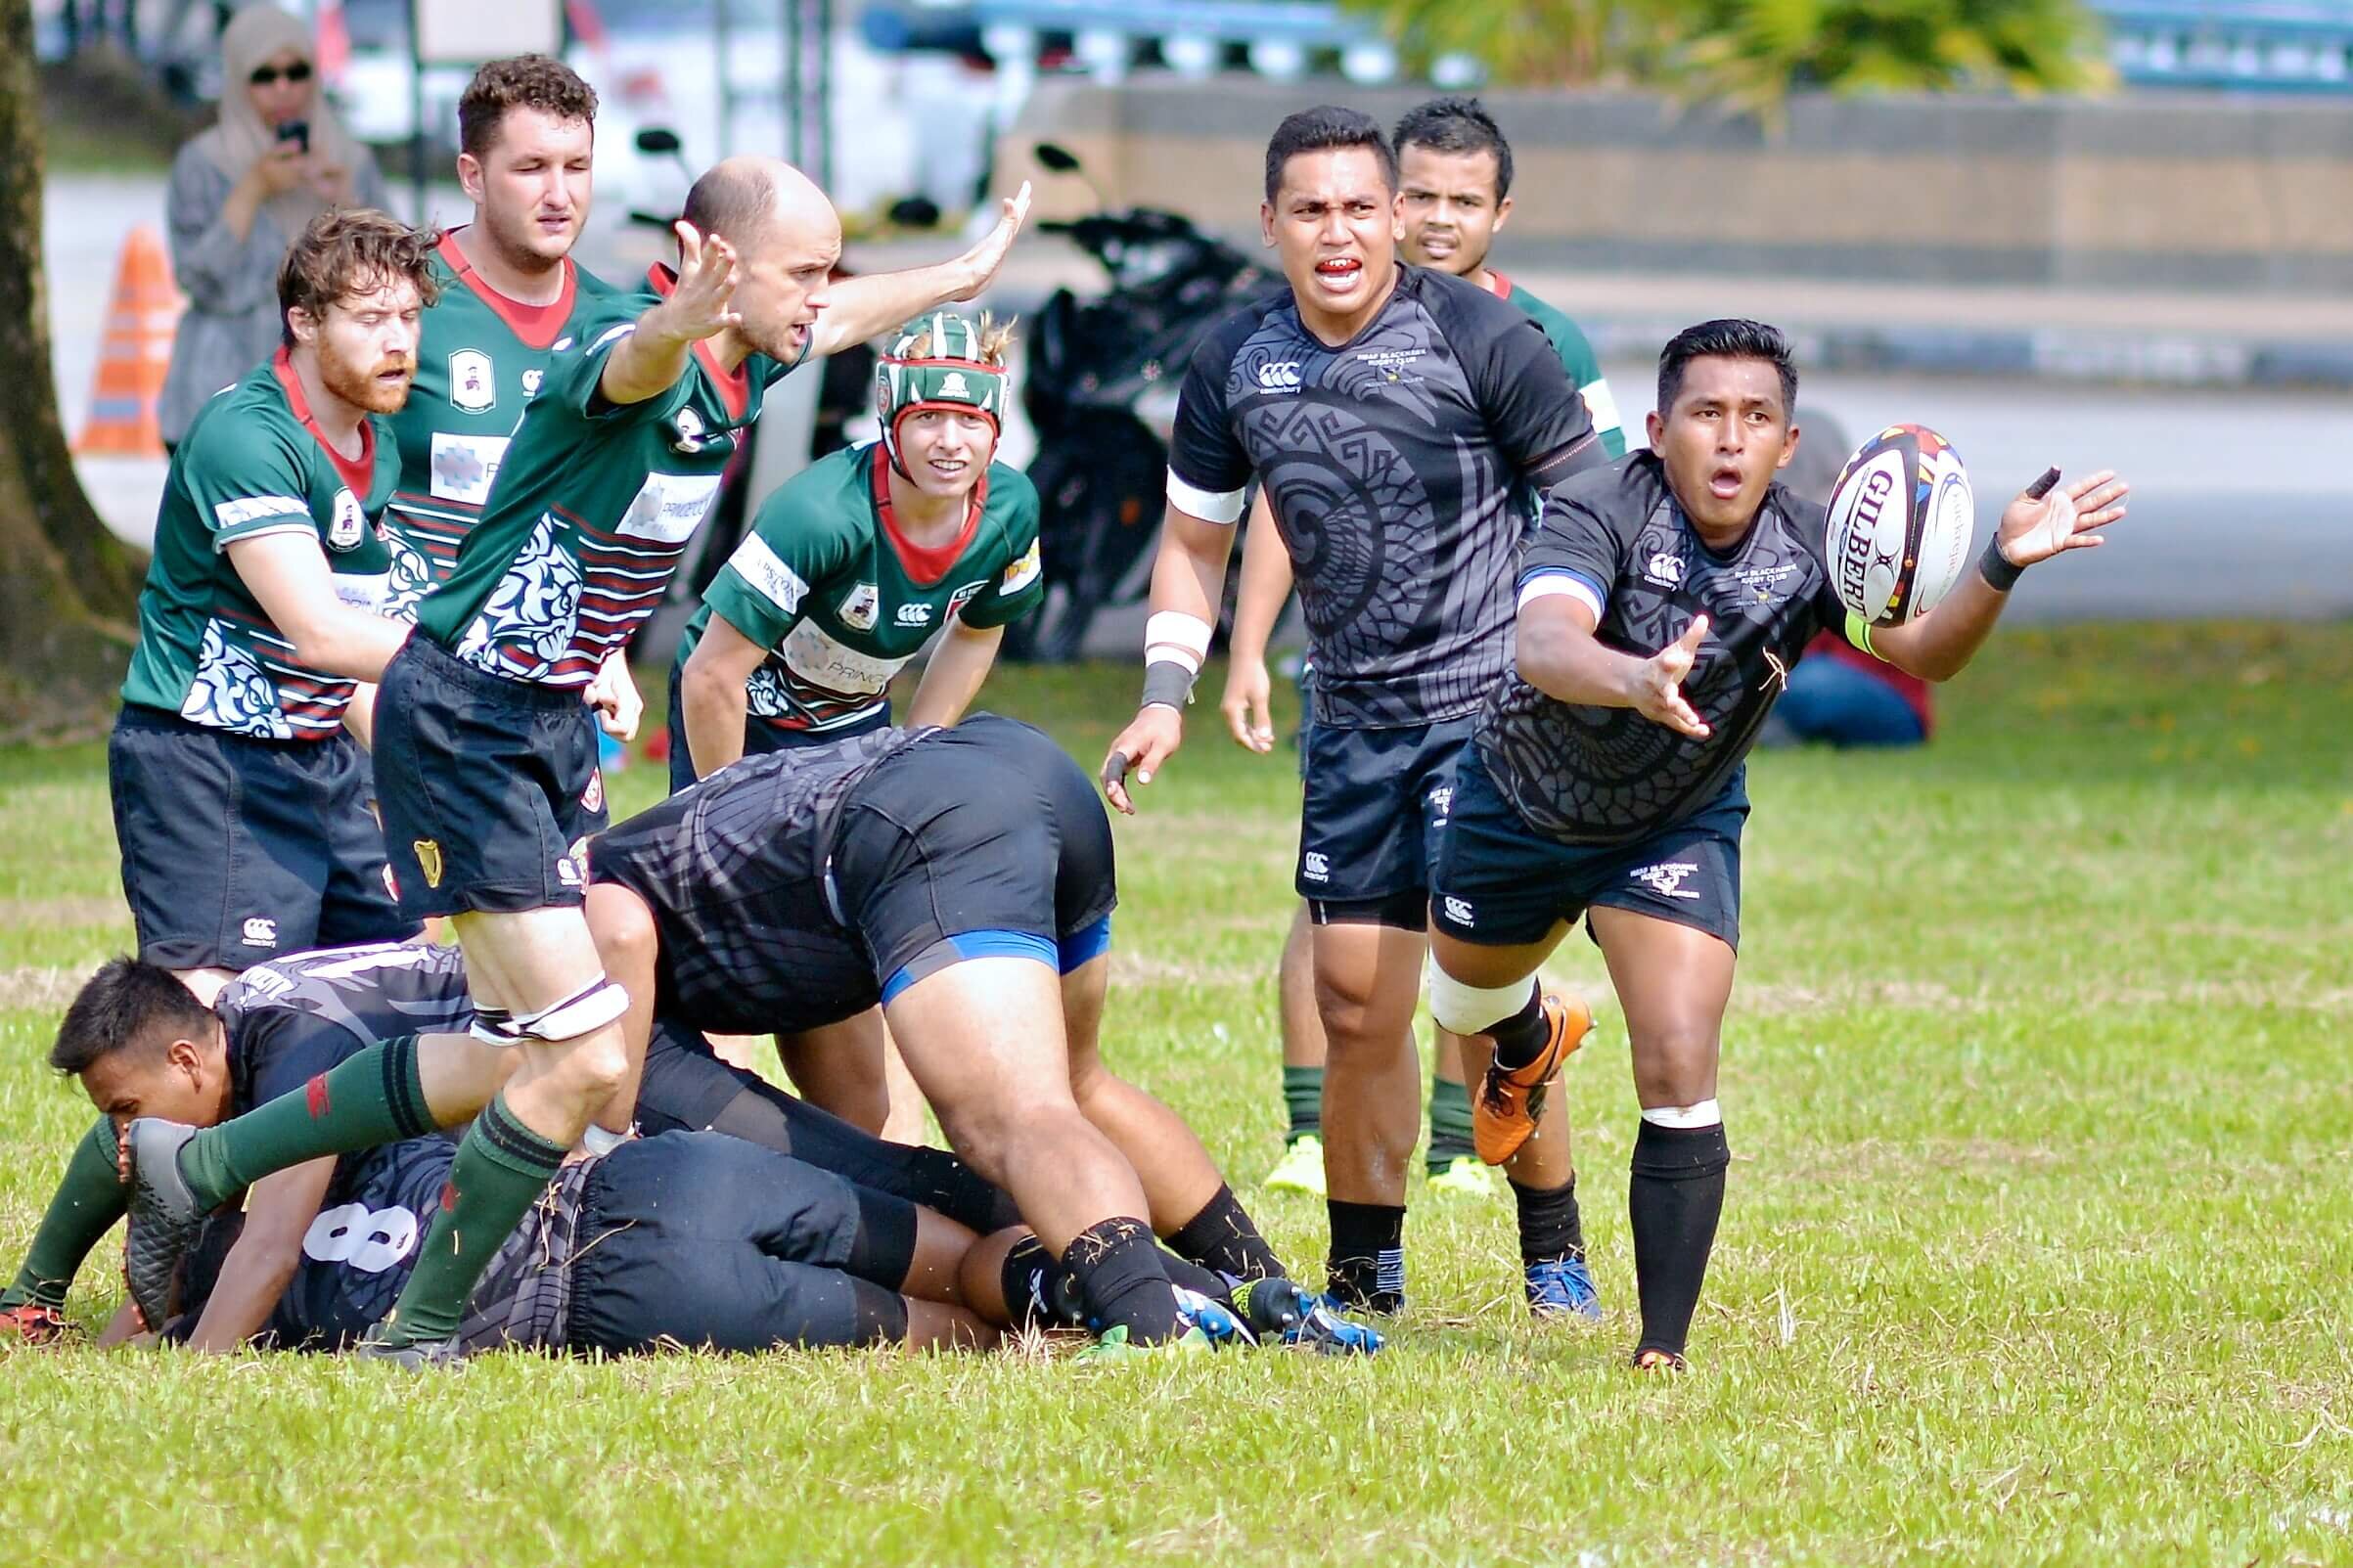 APD dragons rugby match